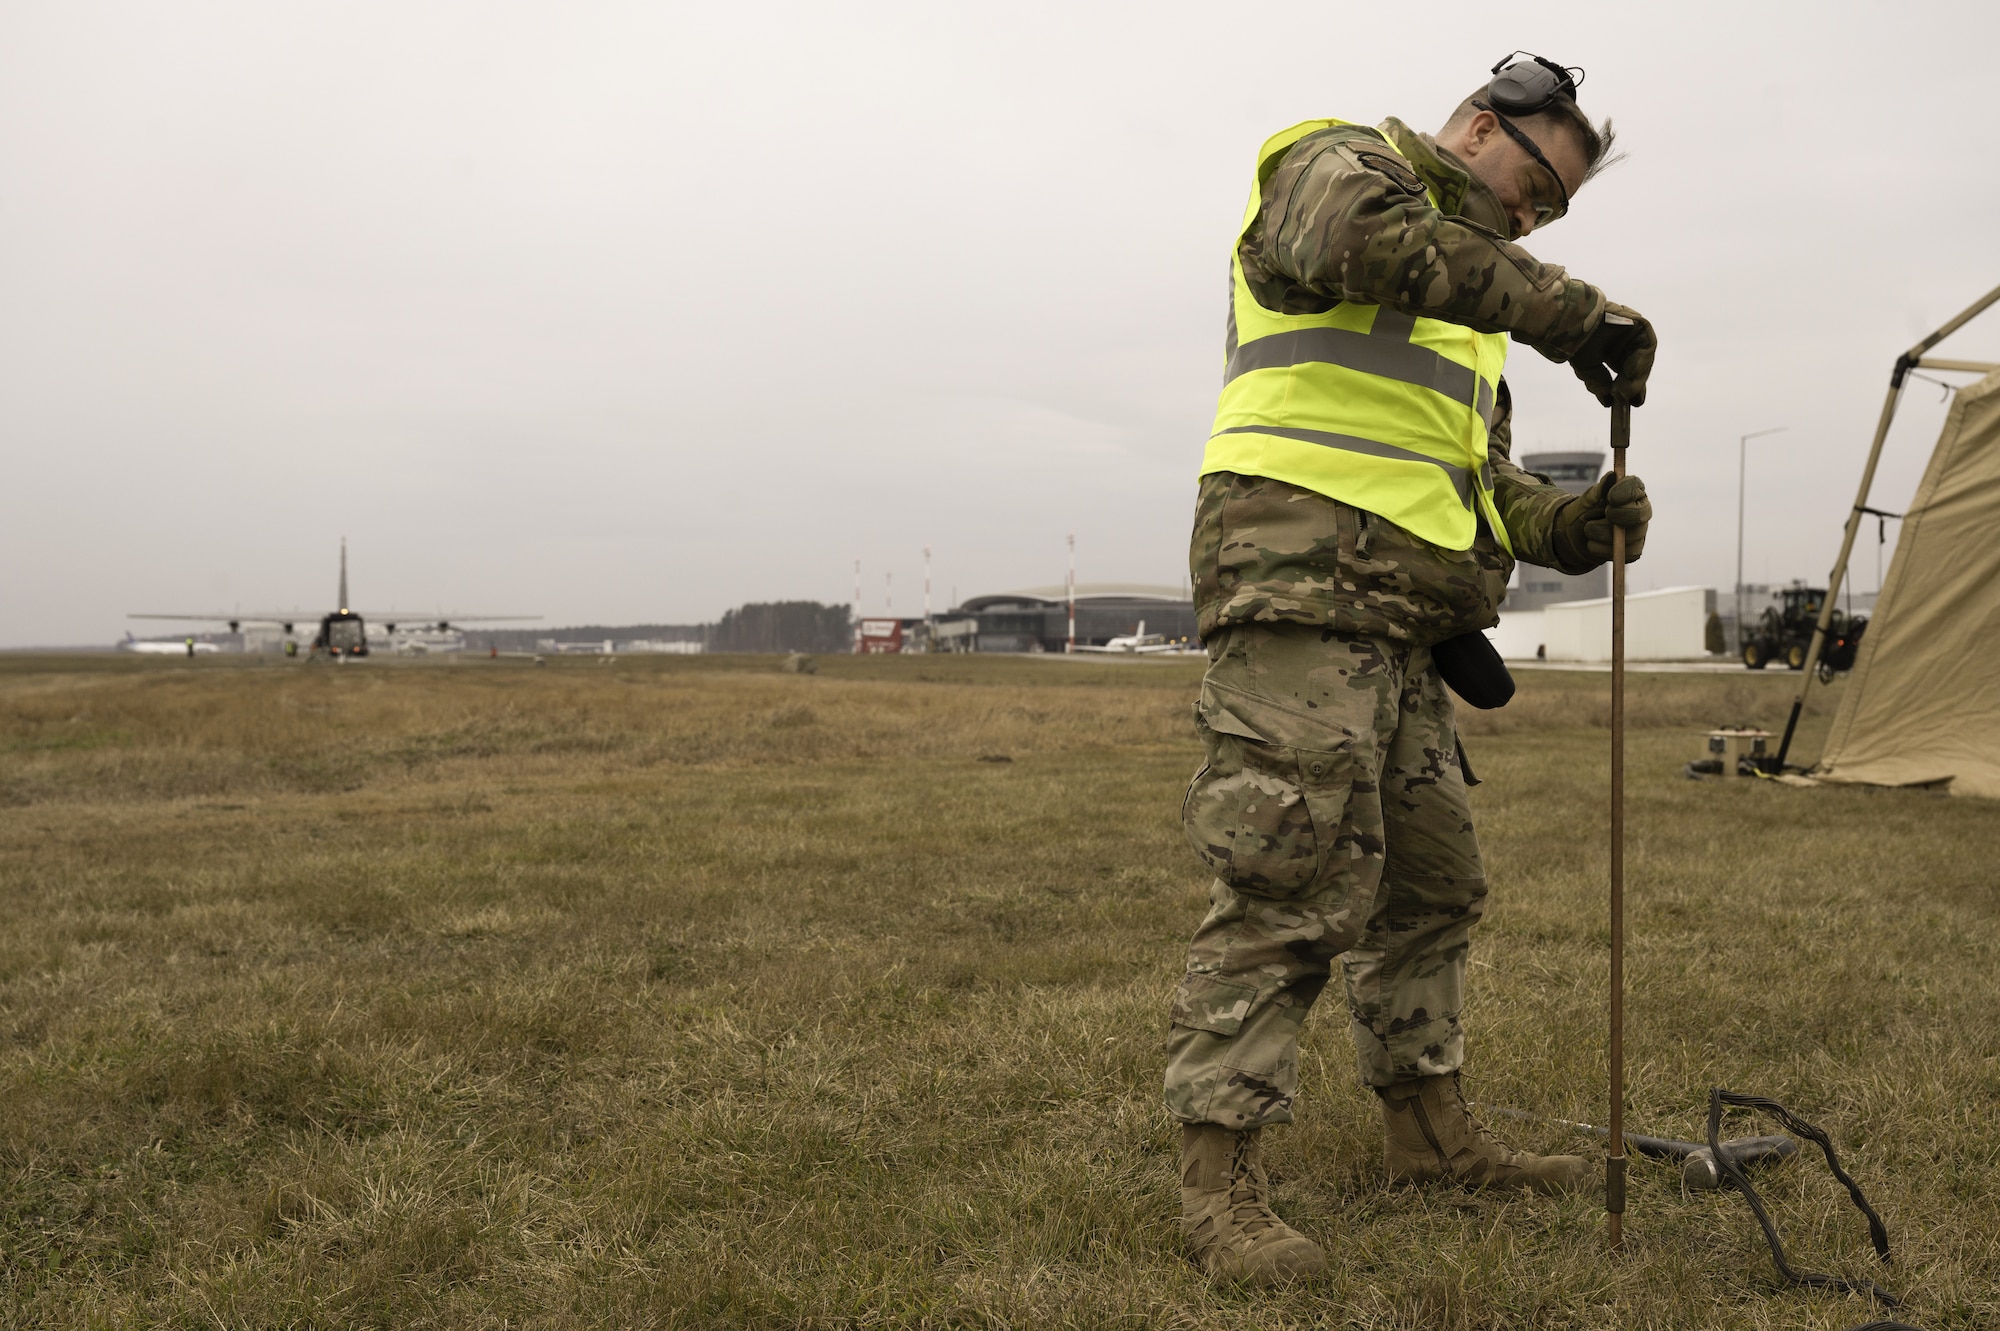 An Airman grounds a generator in Poland.